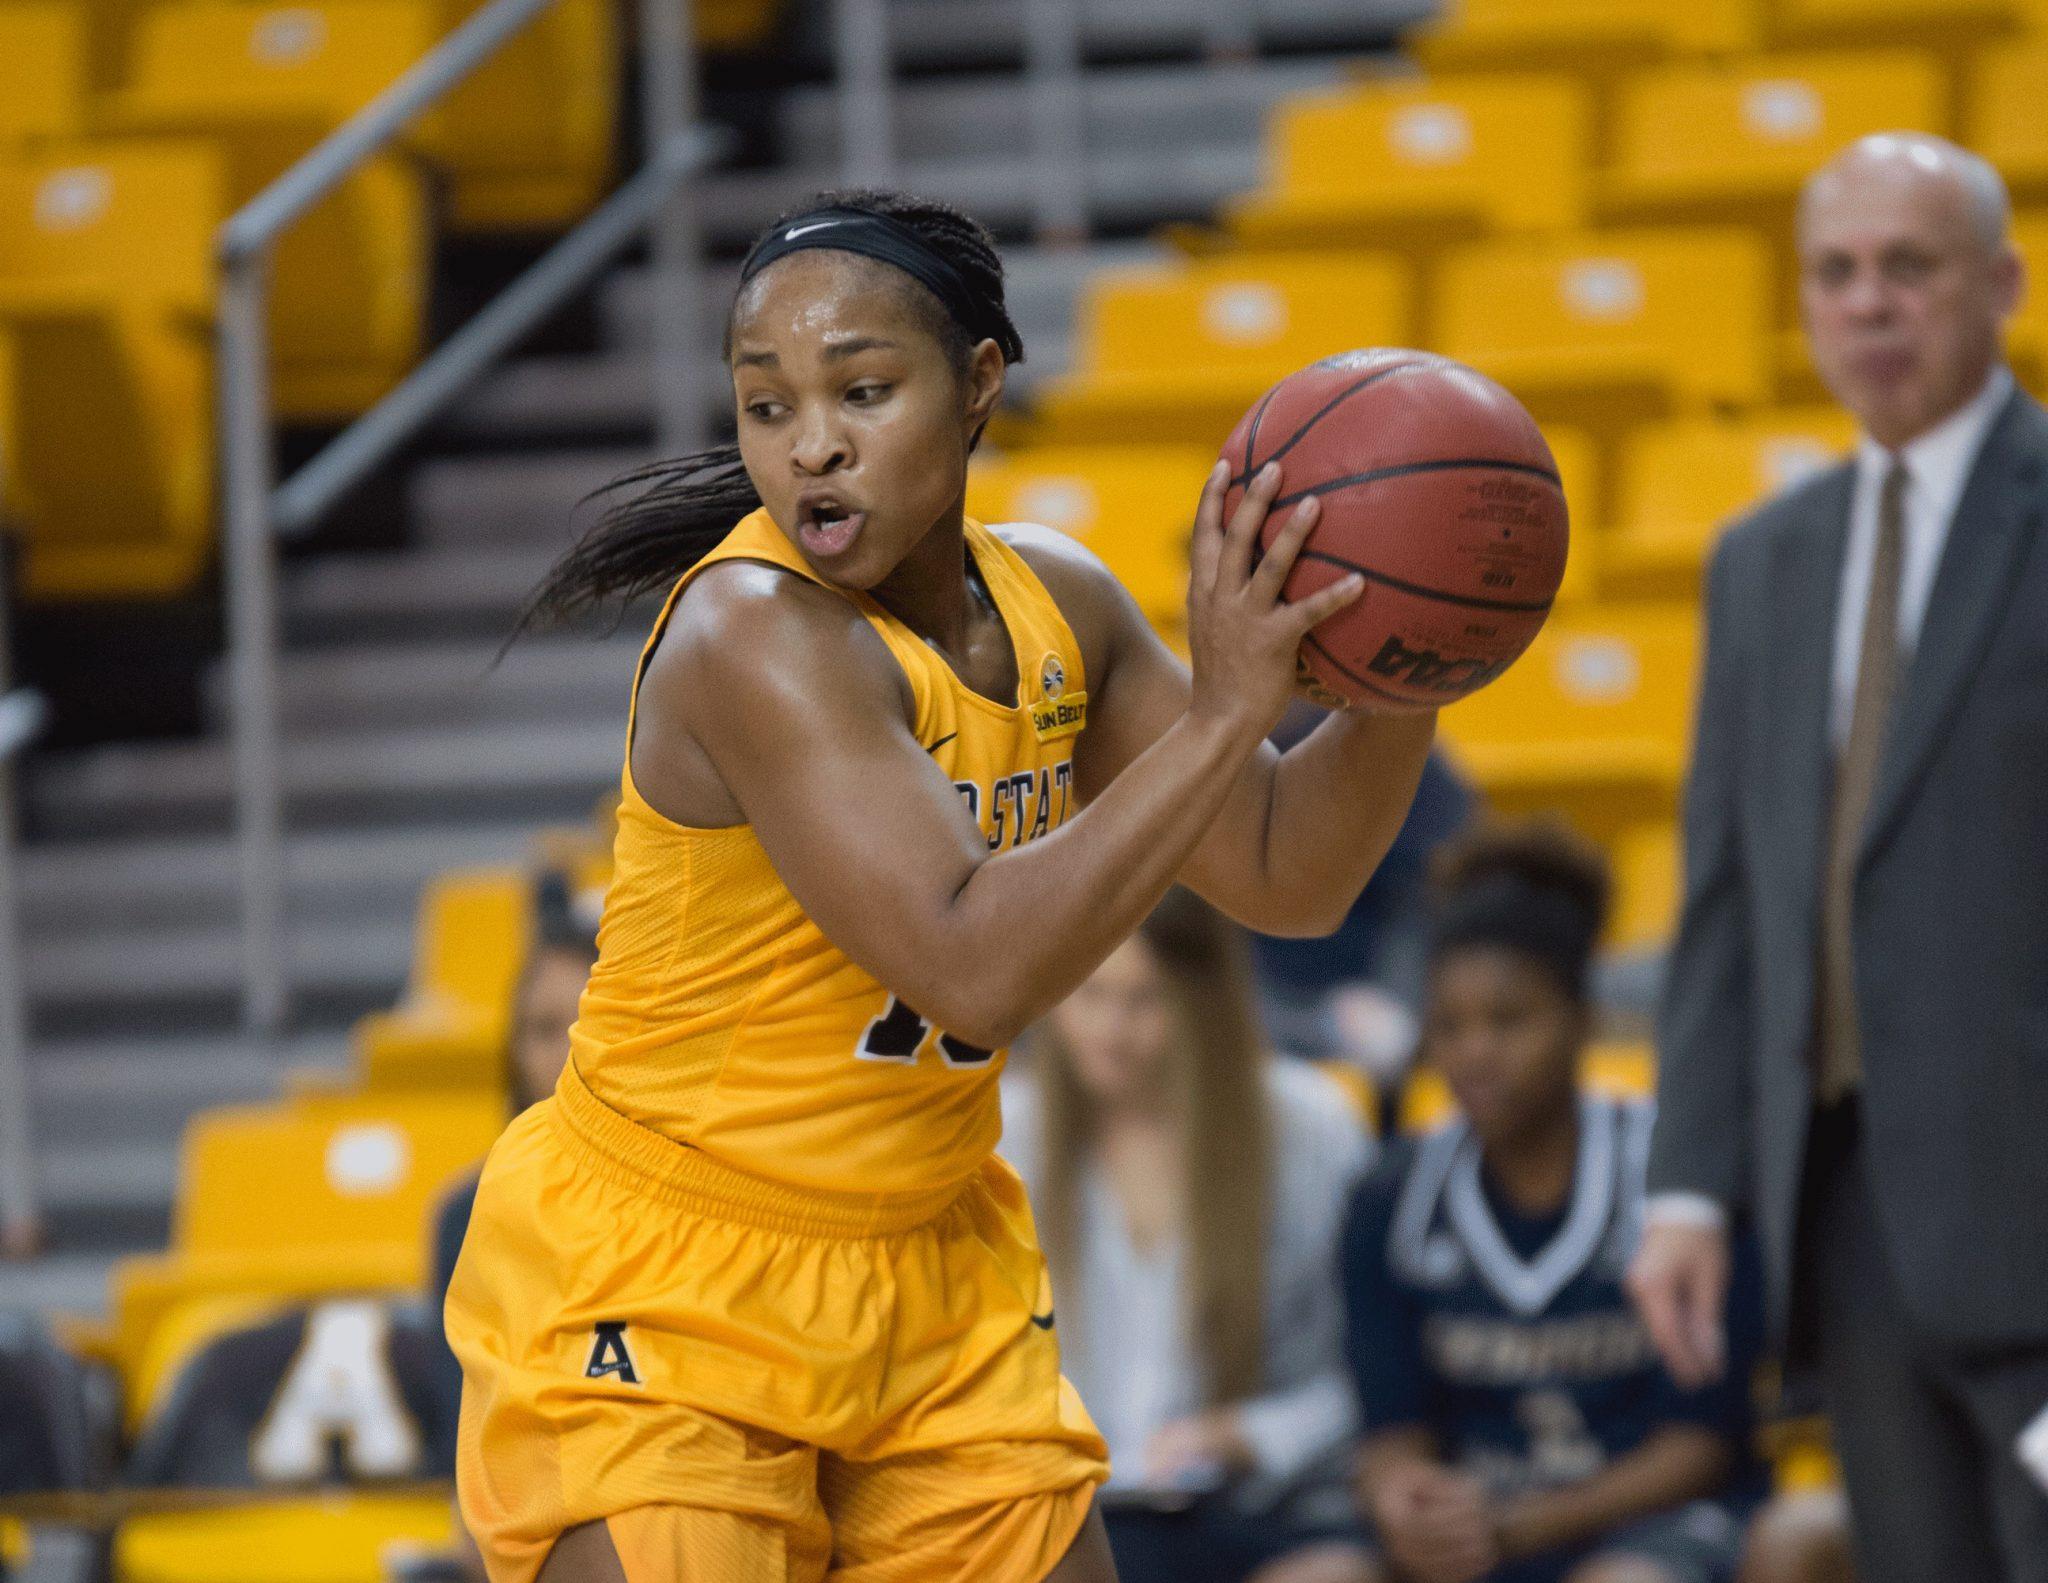 Senior guard Joi Jones, grabs the ball and looks around for an open team mate to pass the ball to. She went 7 for 10 shots and managed to grab 7 rebounds the entire game against Georgia Southern.